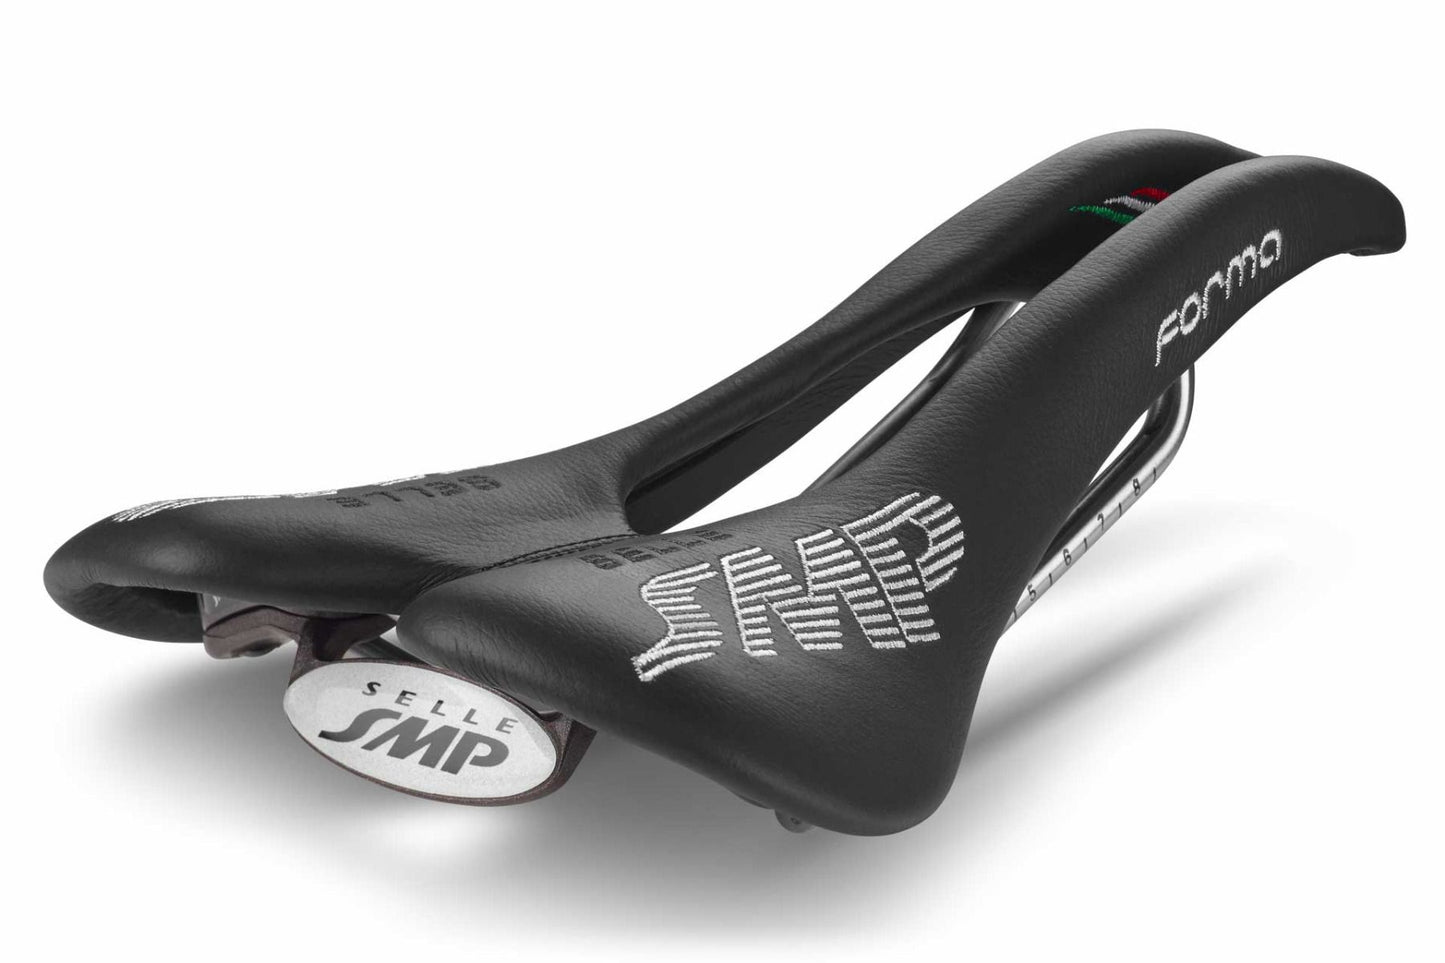 Selle SMP Forma Saddle with Steel Rails (Black)